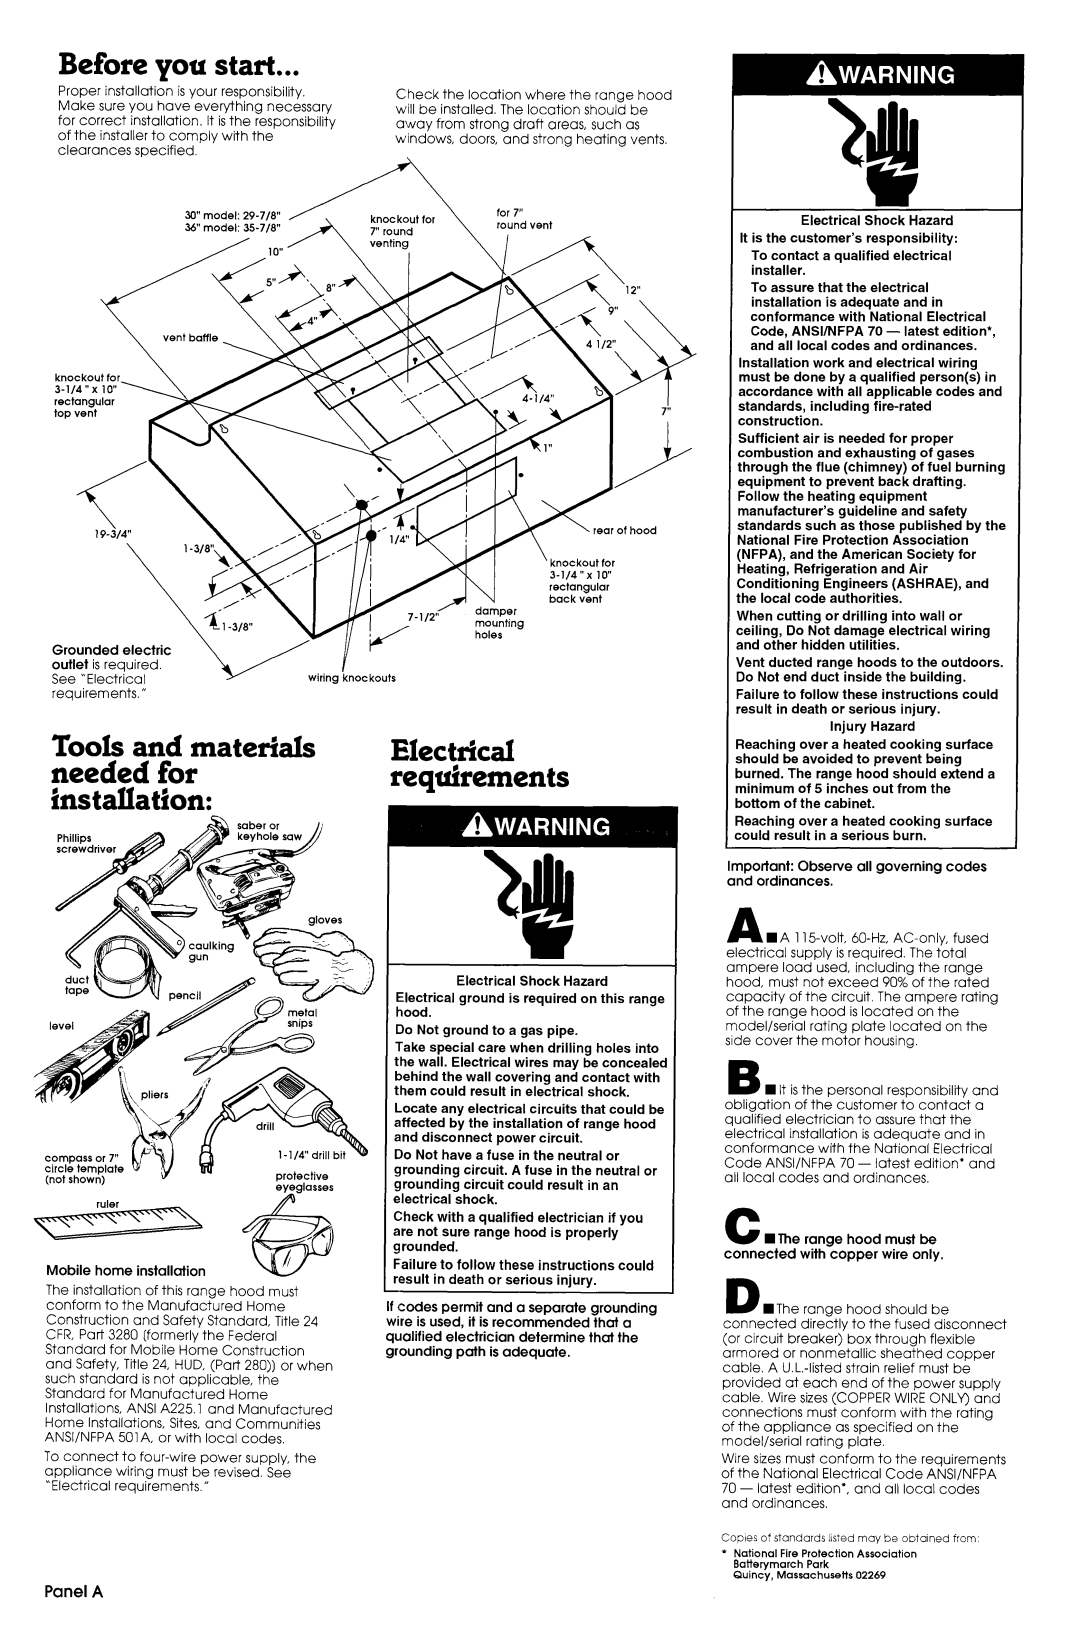 Whirlpool 761883306 manual Before you start, Tools and materials Electrical, needed forrequirements installation, Panel A 